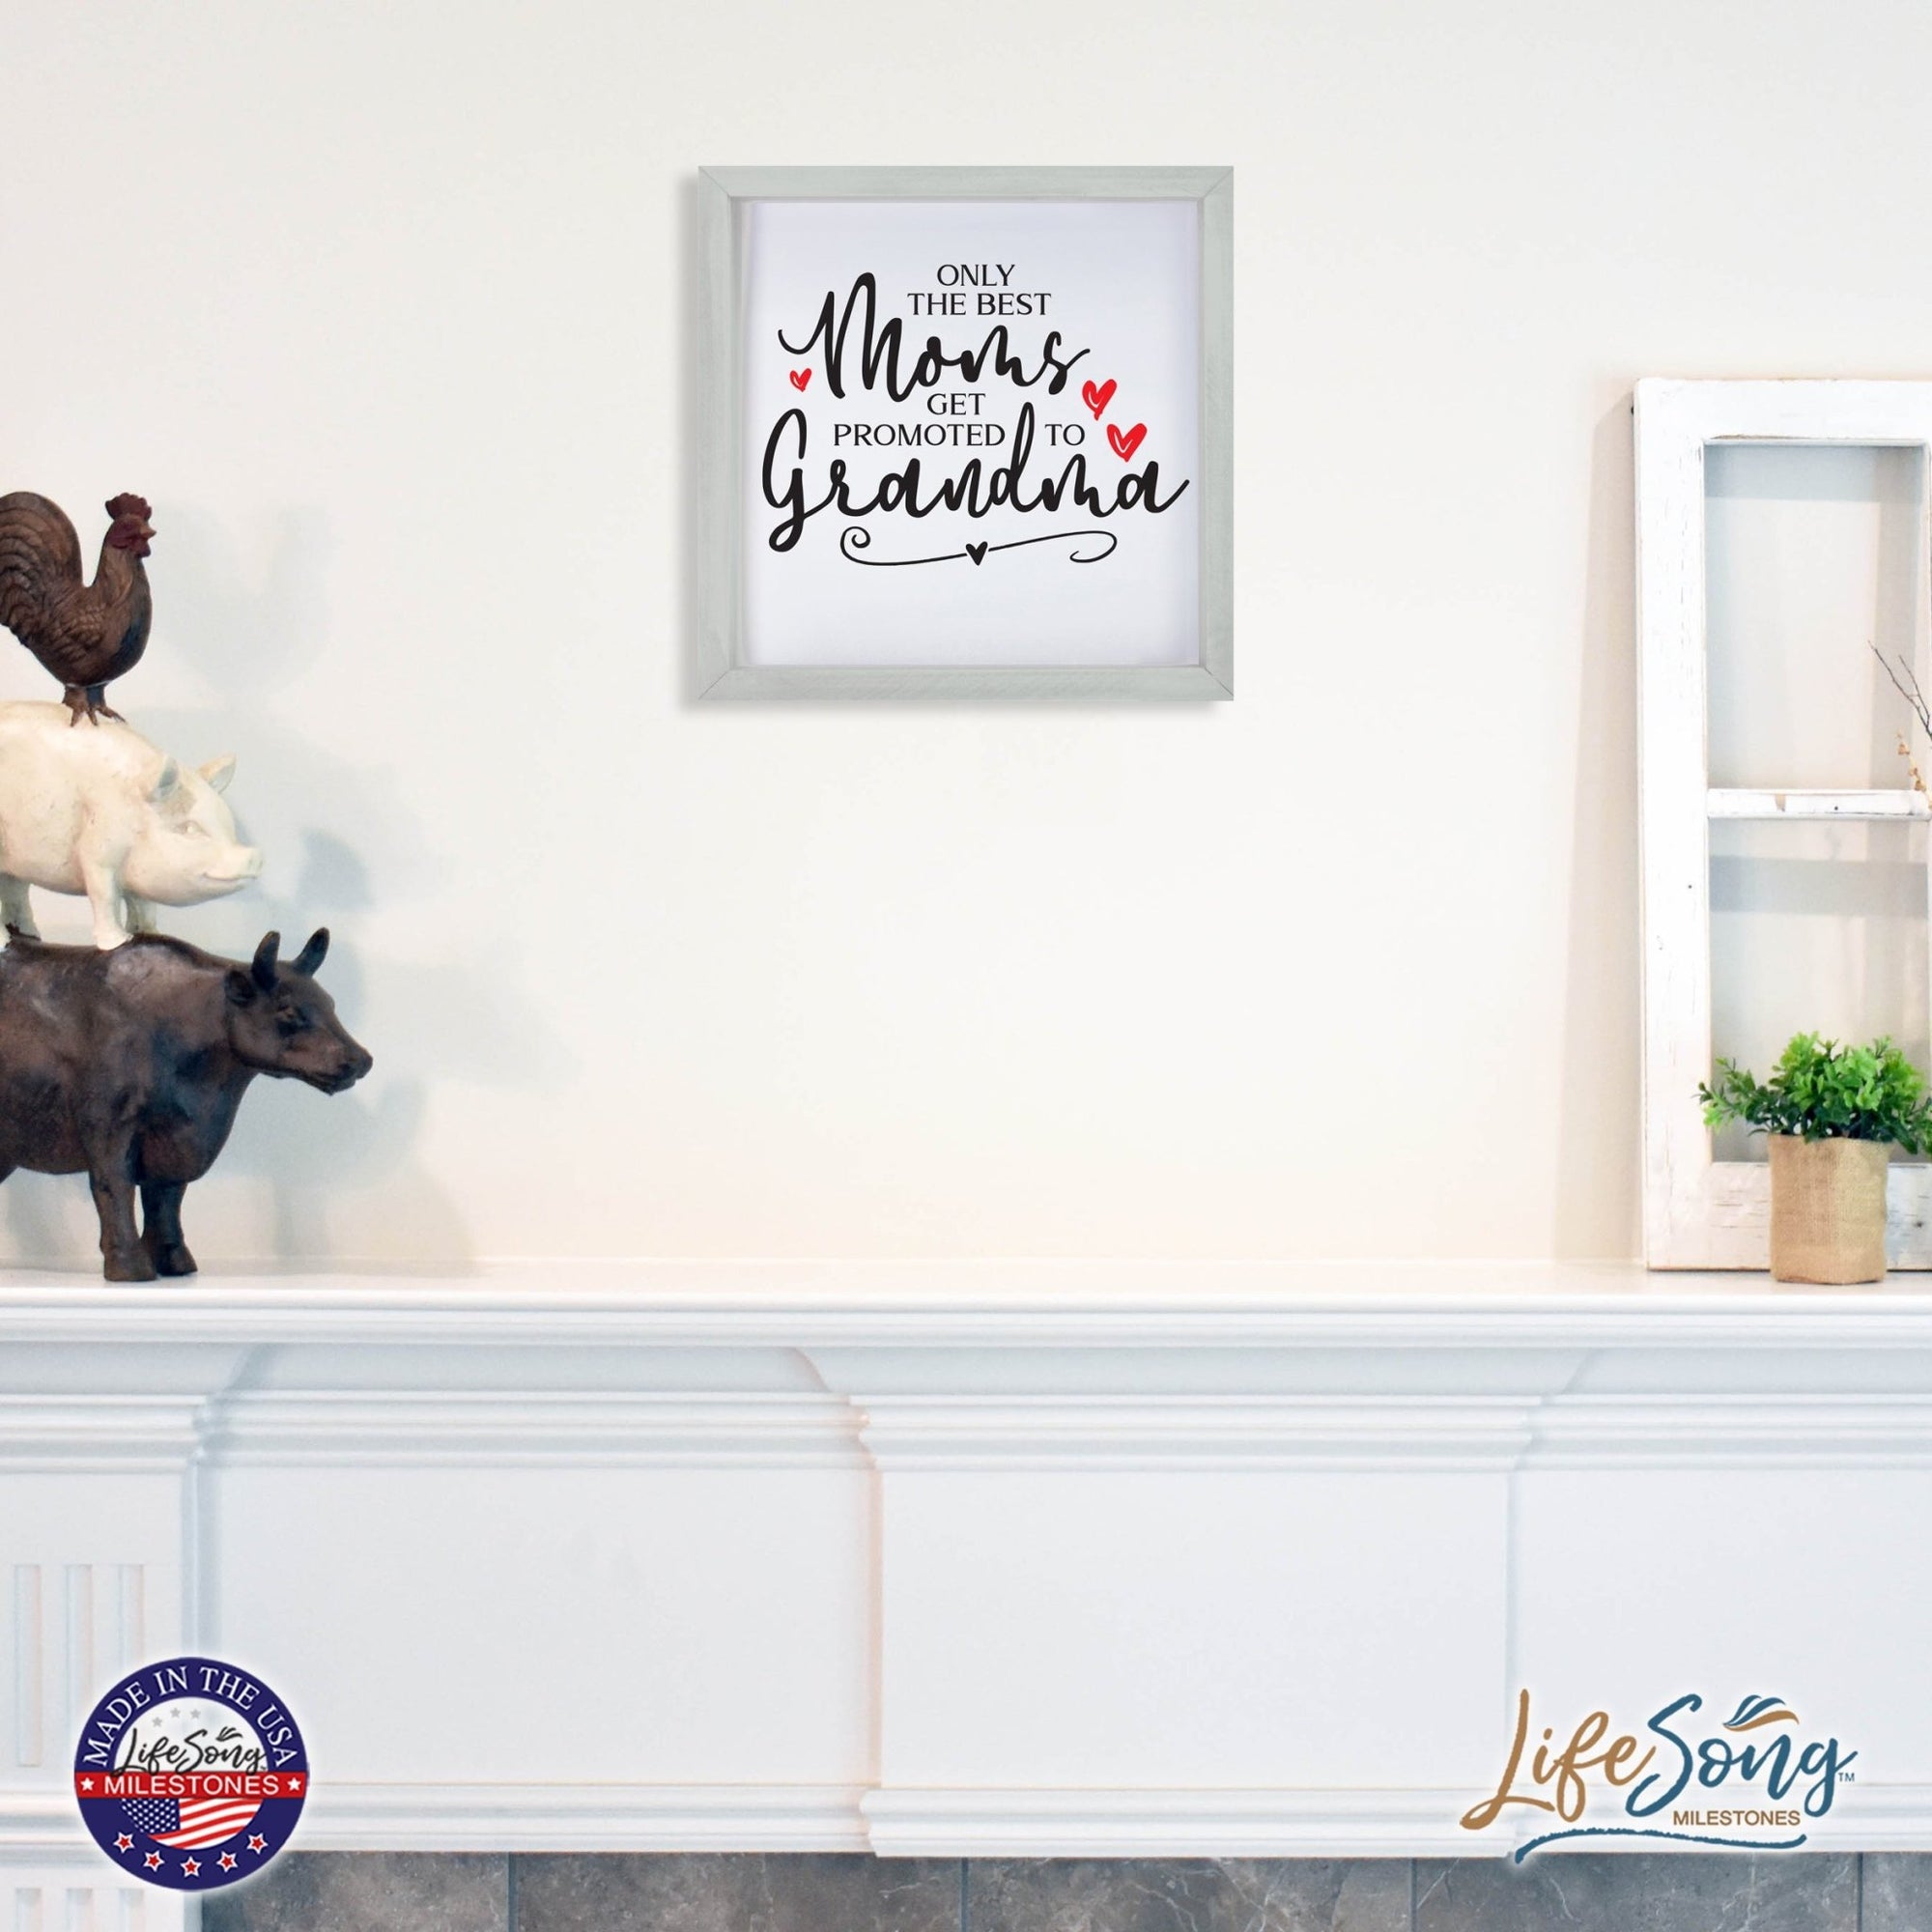 Inspiring Modern Framed Shadow Box 7x7in - Only The Best Moms - LifeSong Milestones